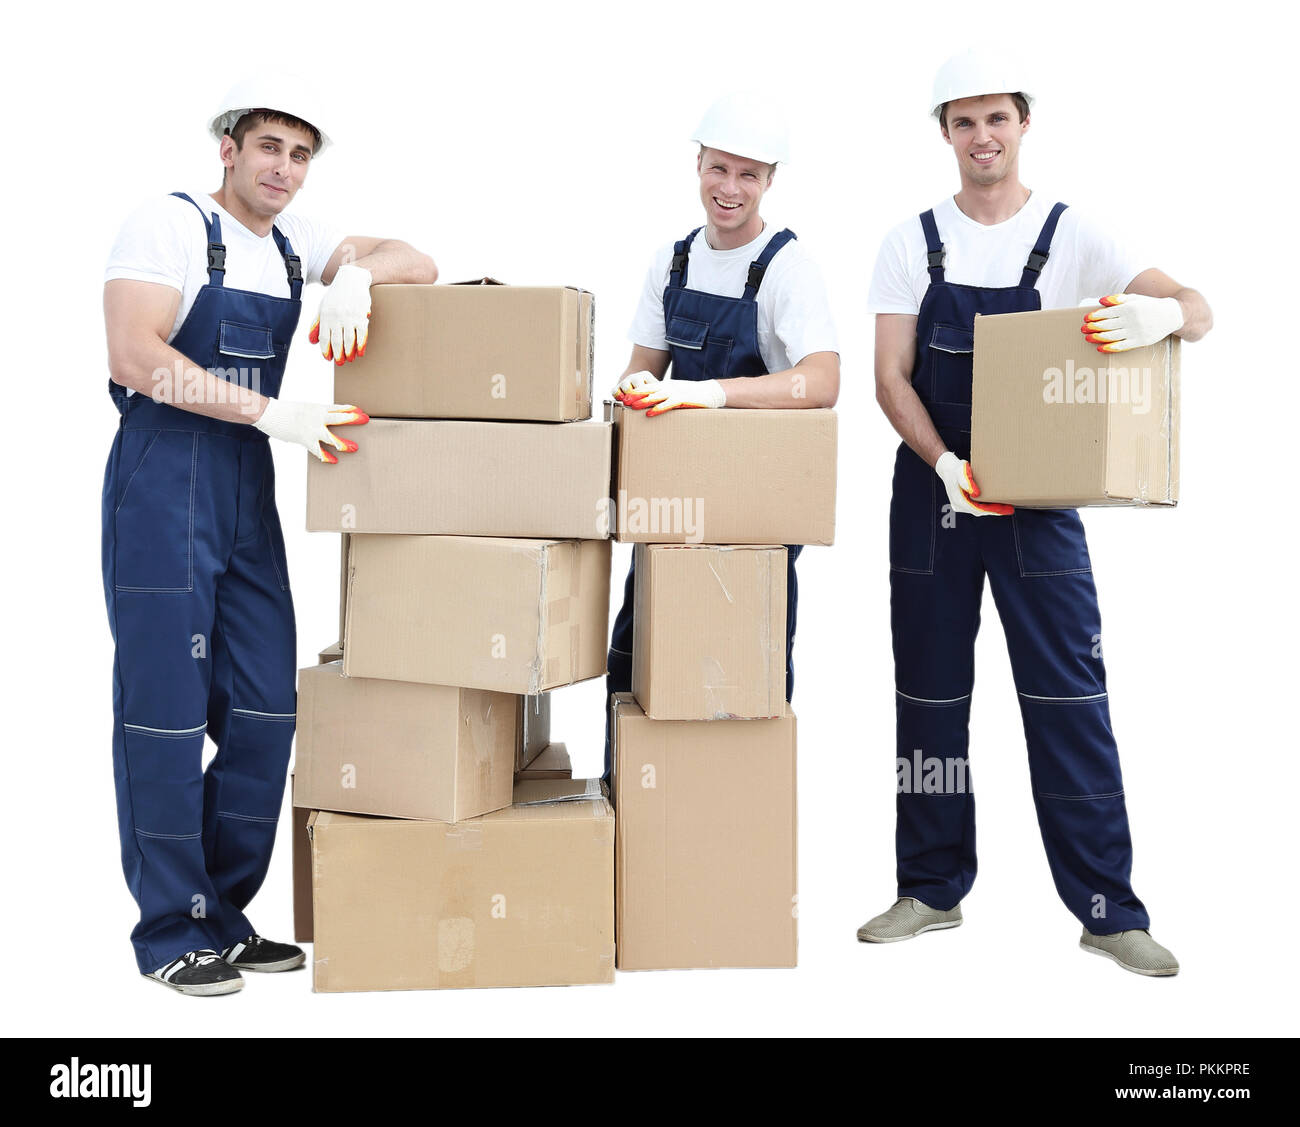 Group of people builders with boxes Stock Photo